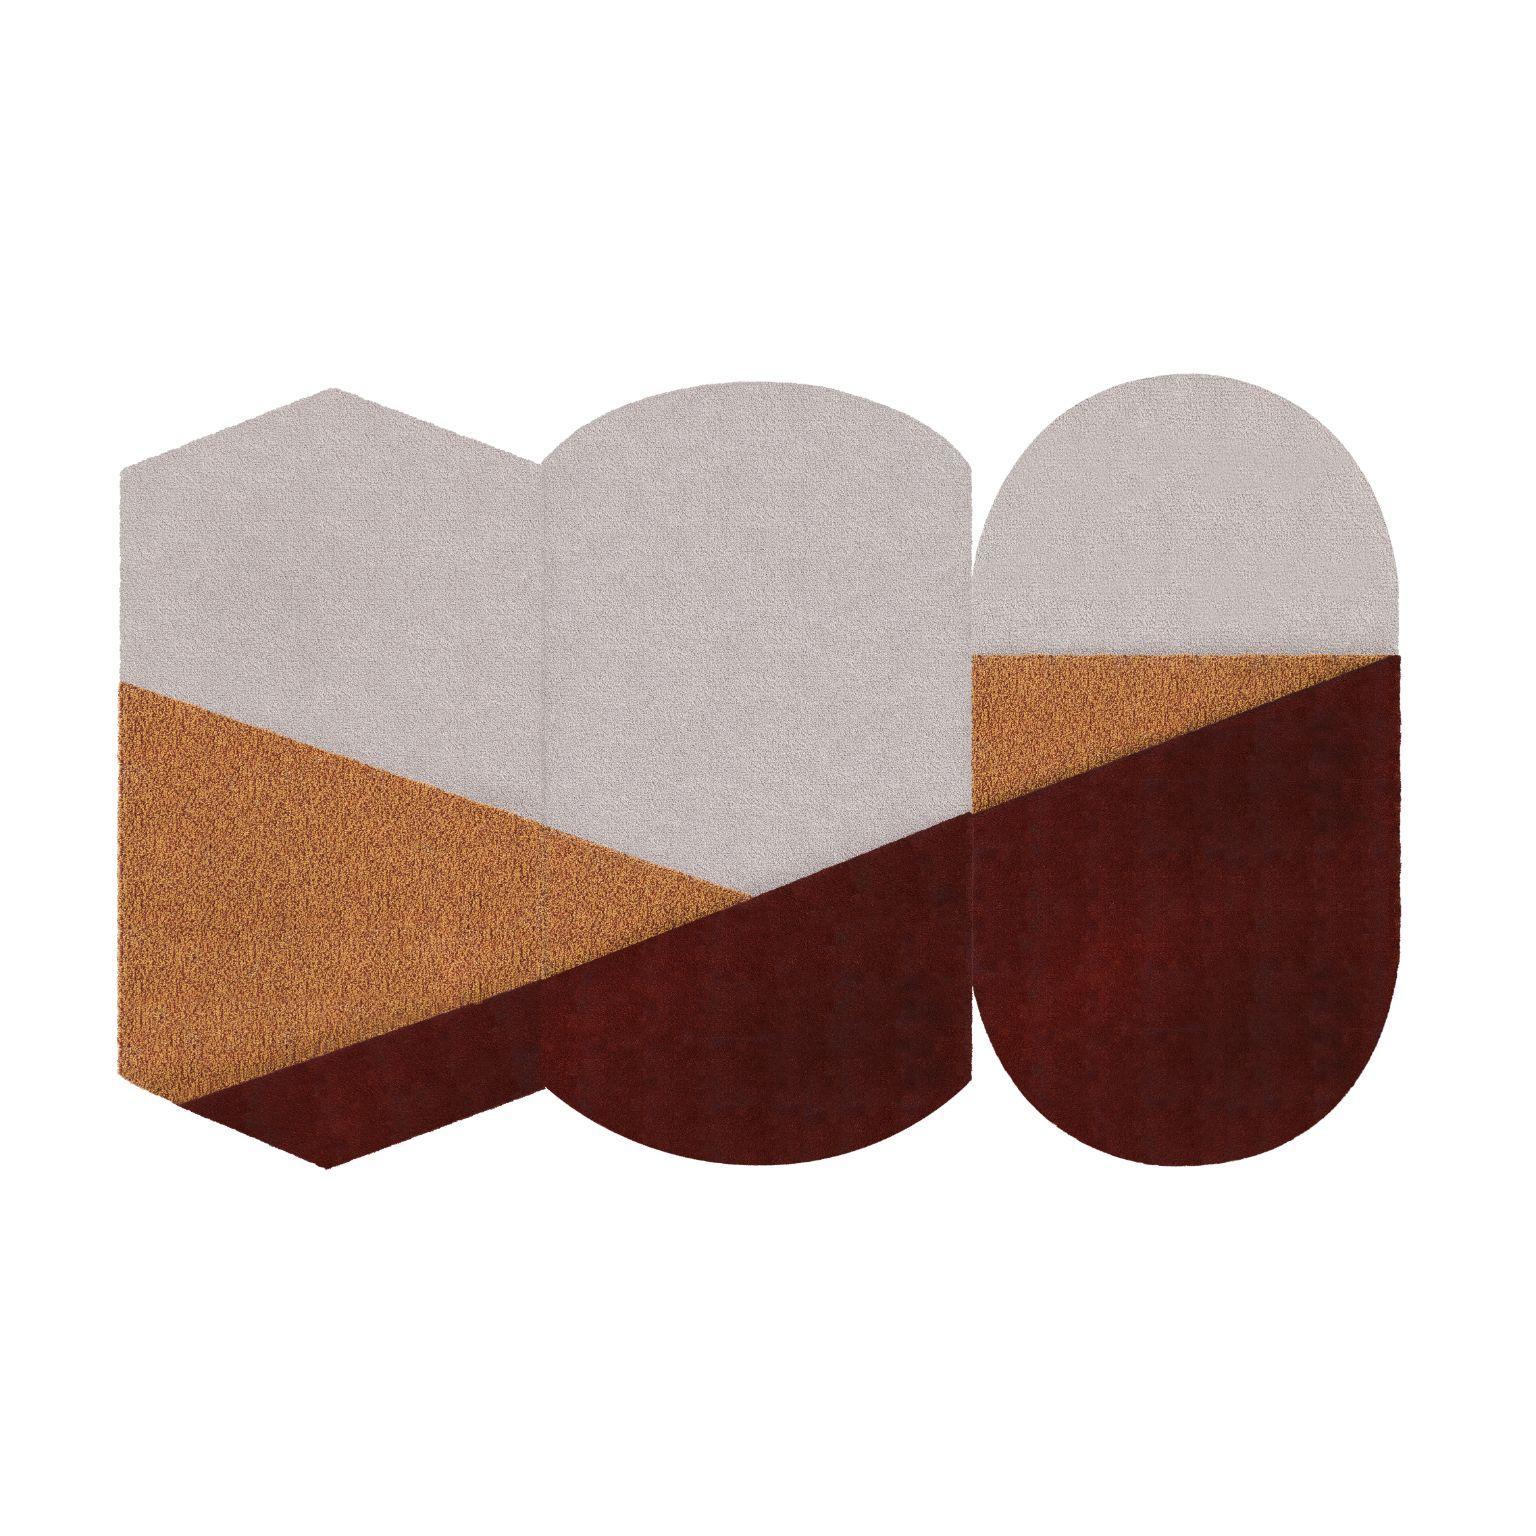 Medium Bordeaux Oci Triptych rug by Seraina Lareida
Dimensions: 330 x 200 cm
Materials: 100% New Zealand top-quality wool.
Available in sizes Small or Large. Also available in colors: Brick/Pink, Yellow/Gray, Green/Brick, Blue/Brick. Customizable